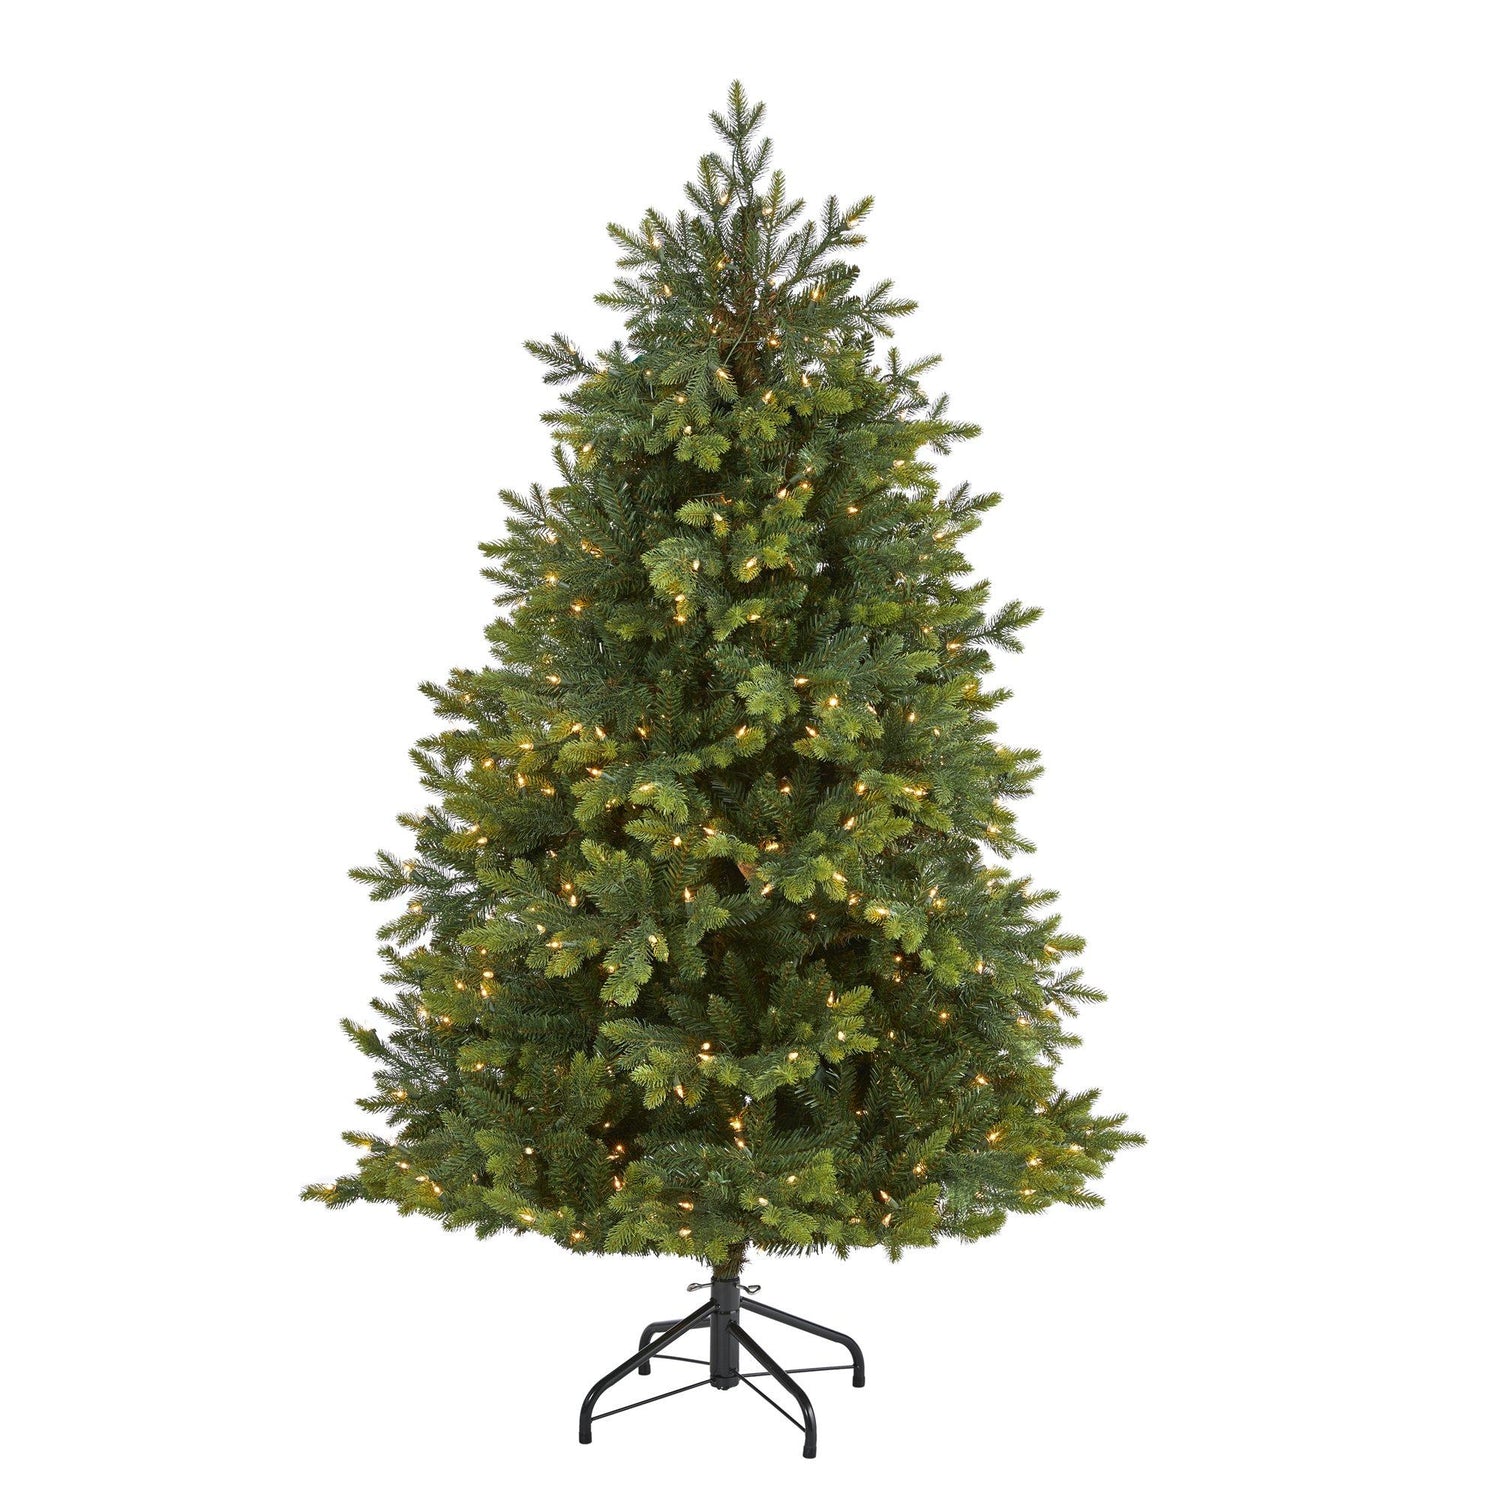 6’ North Carolina Fir Artificial Christmas Tree with 450 Clear Lights and 2303 Bendable Branches